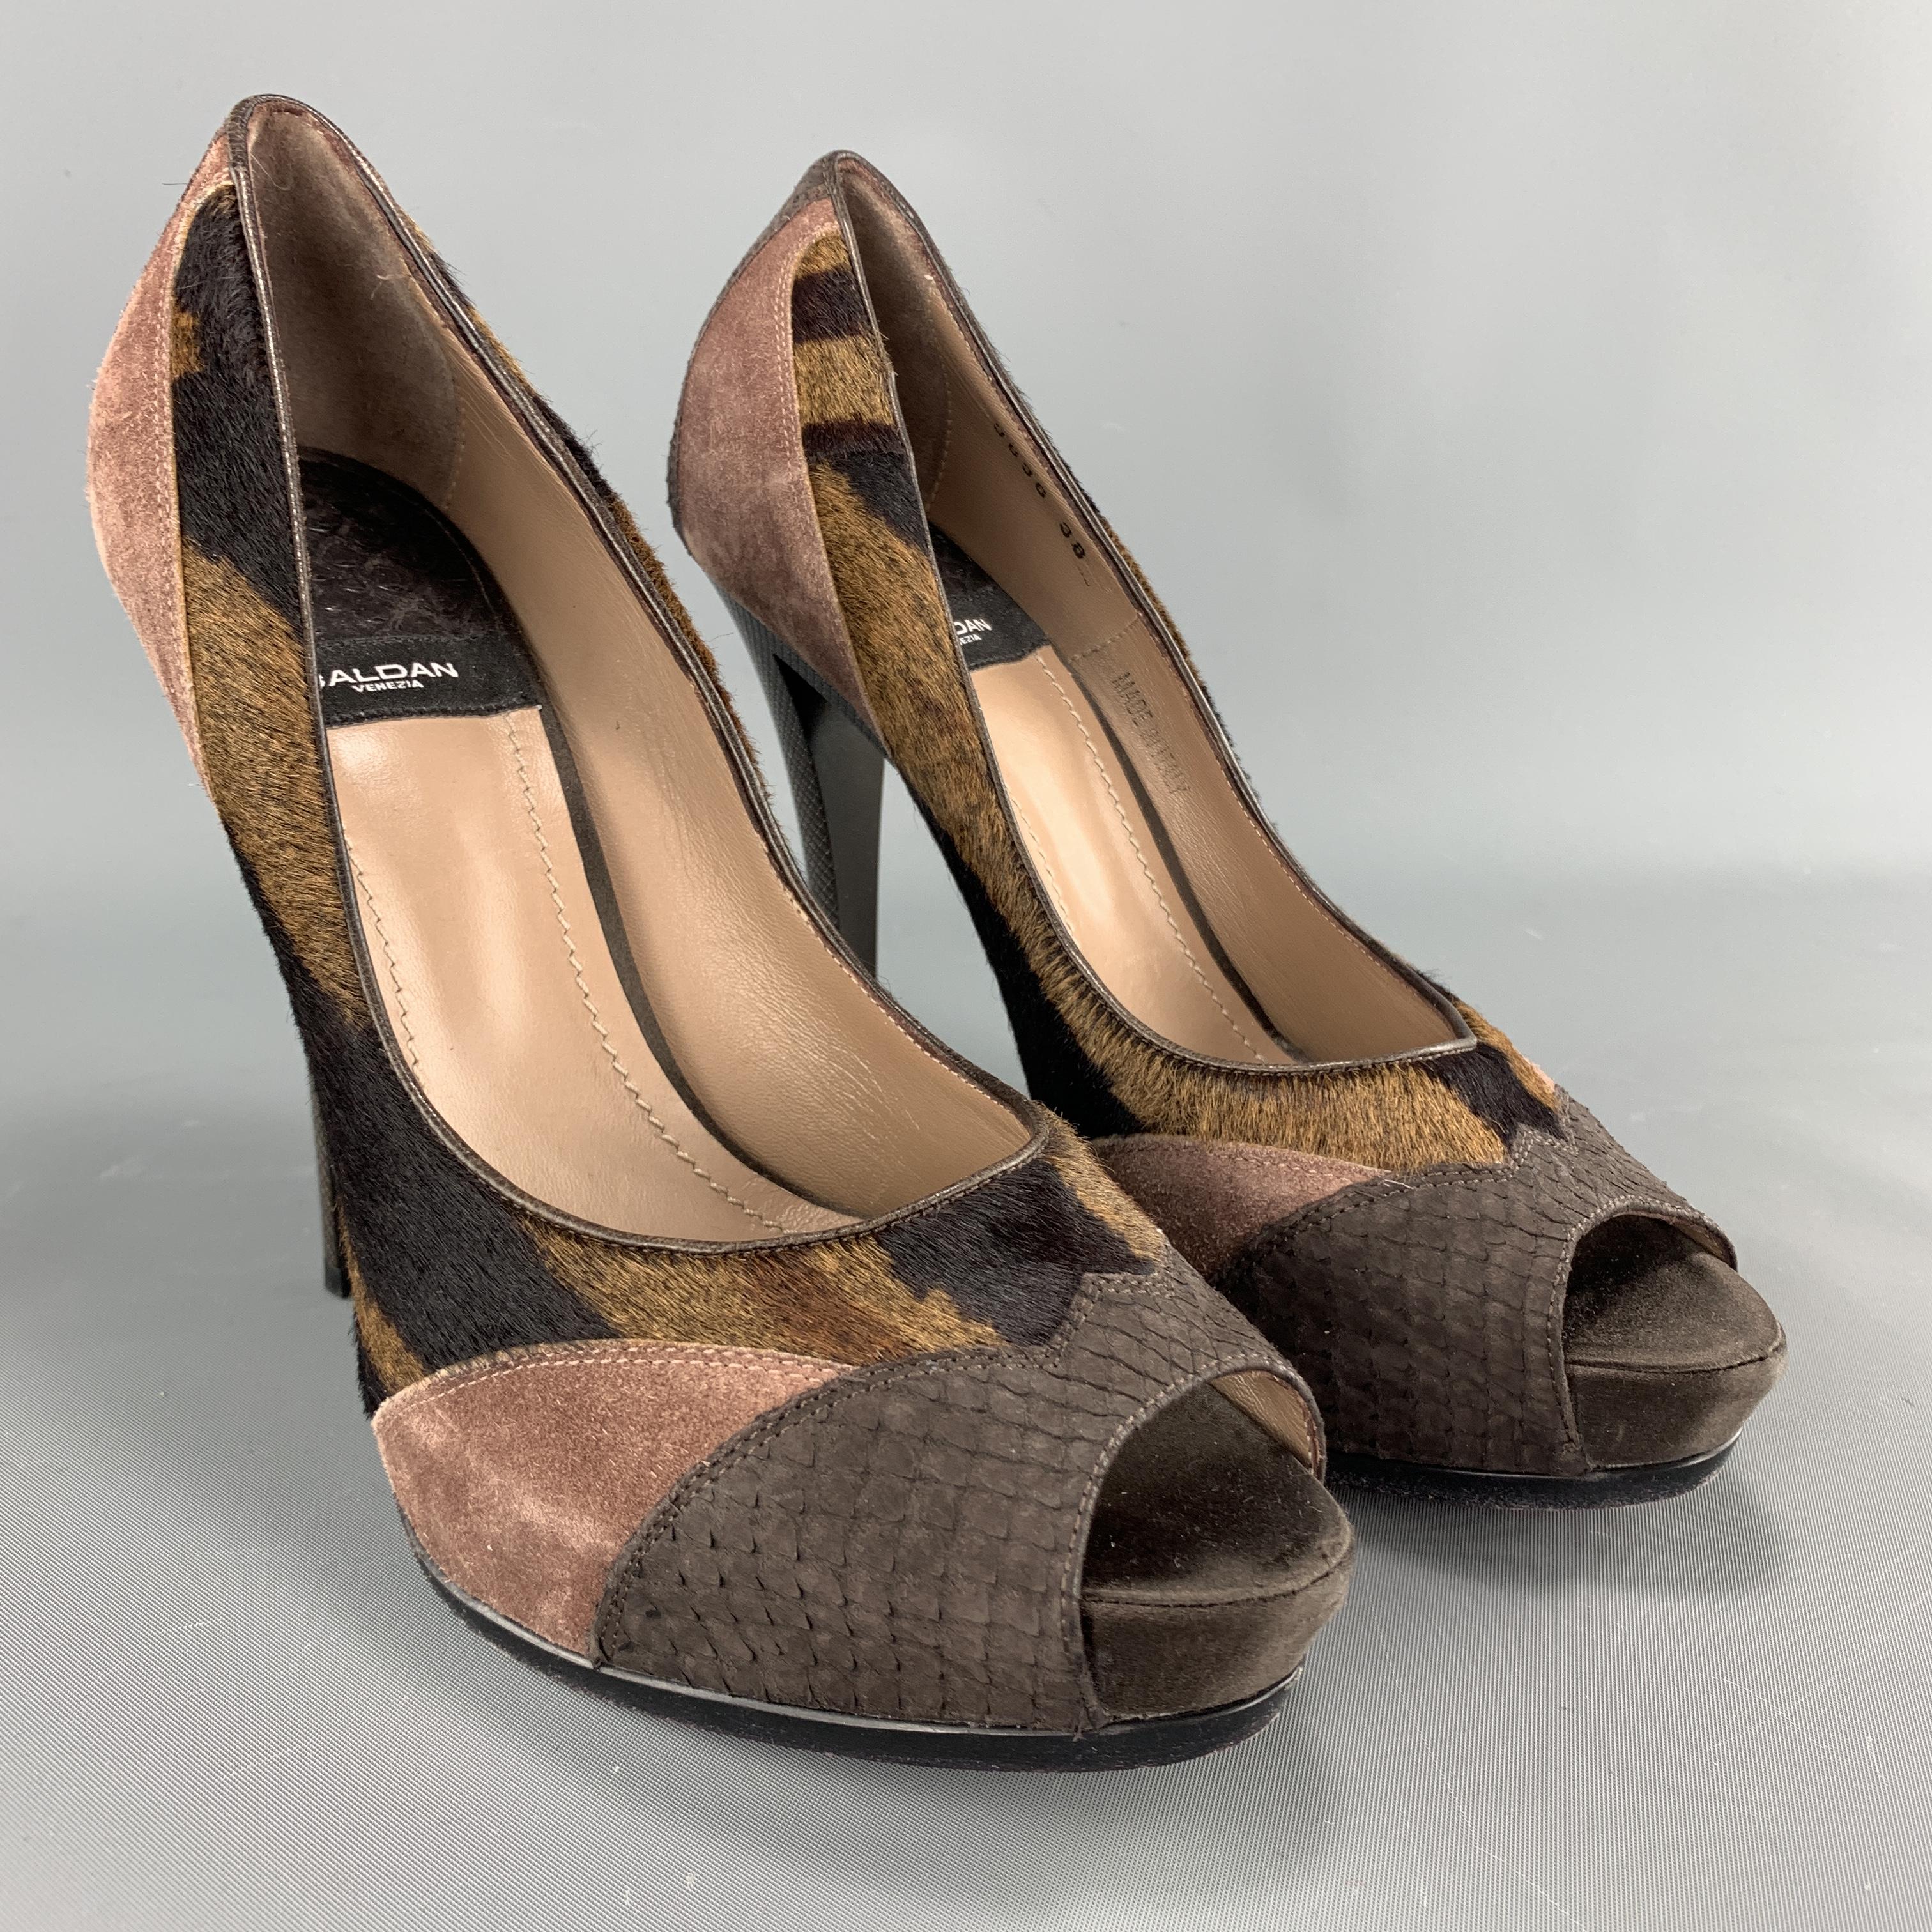 BALDAN pumps come in mauve purple suede with gray snake skin leather and brown tiger print ponyhair panels, peep toe, and hidden platform. Made in Italy.

Very Good Pre-Owned Condition.
Marked: IT 38

Heel: 5in.
Platform: 1 in.